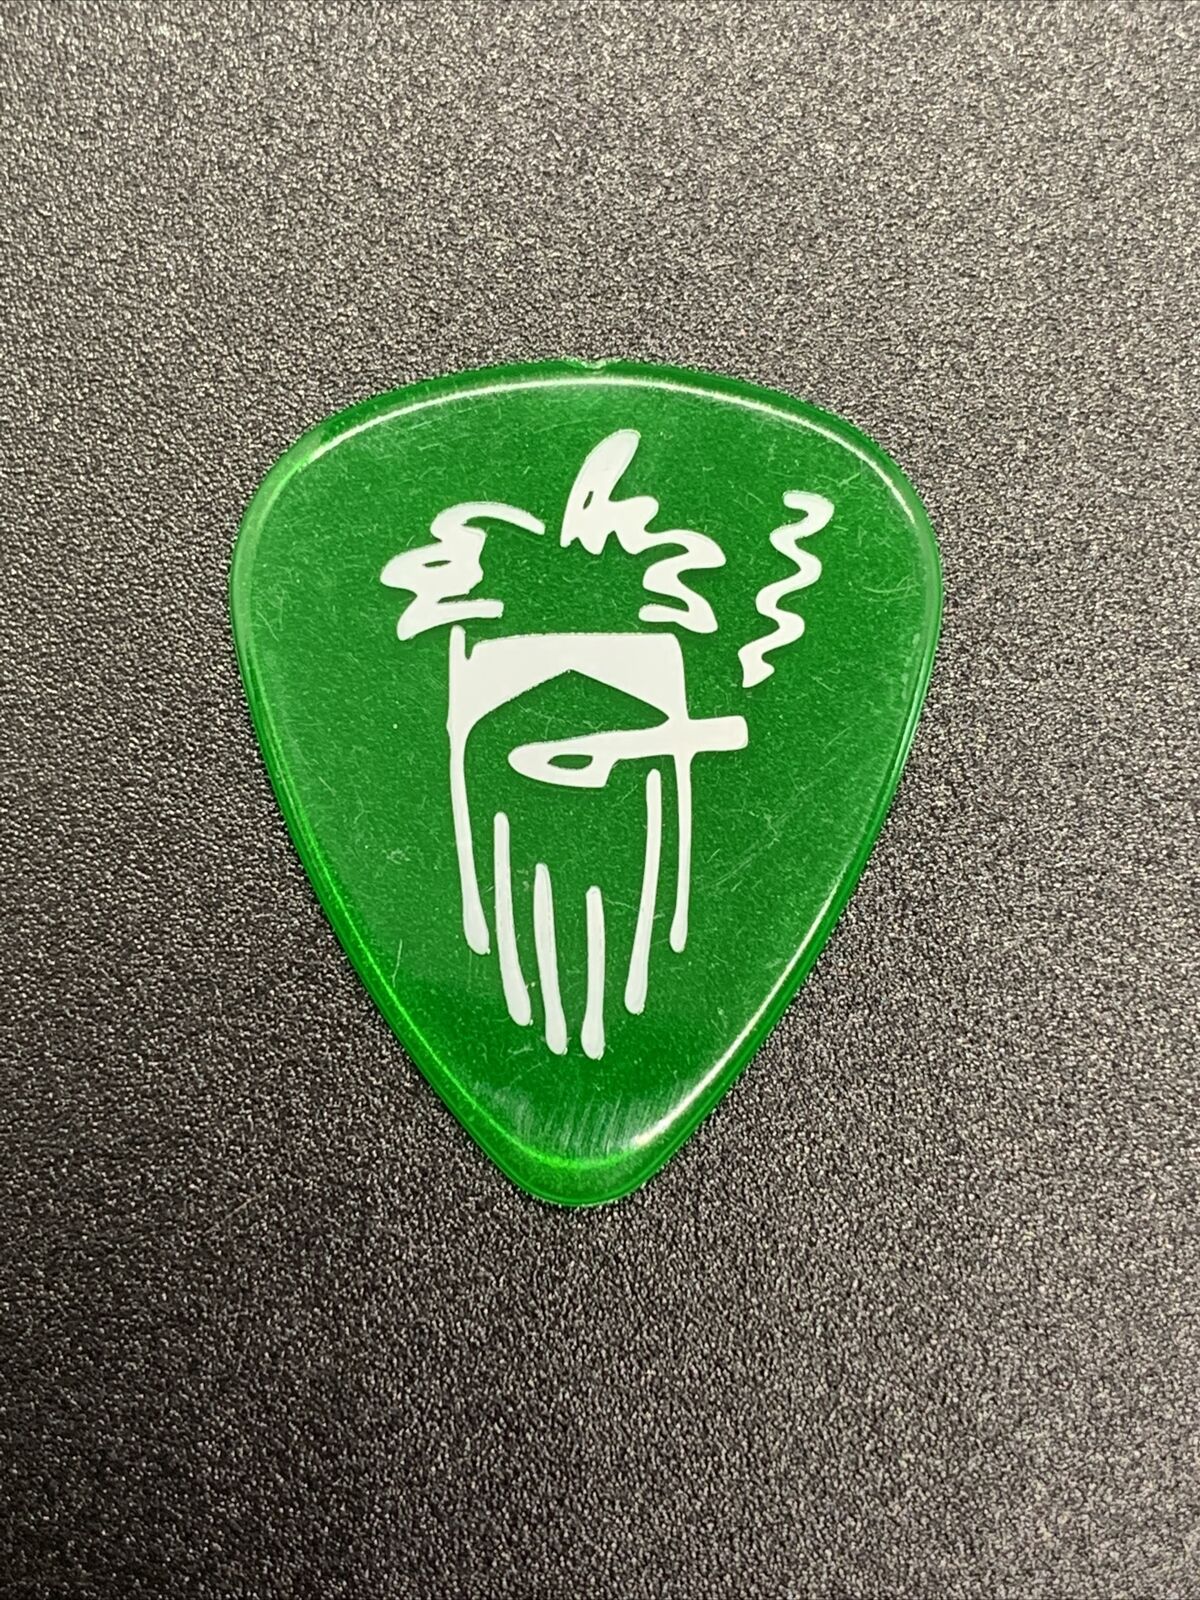 Zz Top Billy Gibbons 2020 Green Translucent Guitar Pick